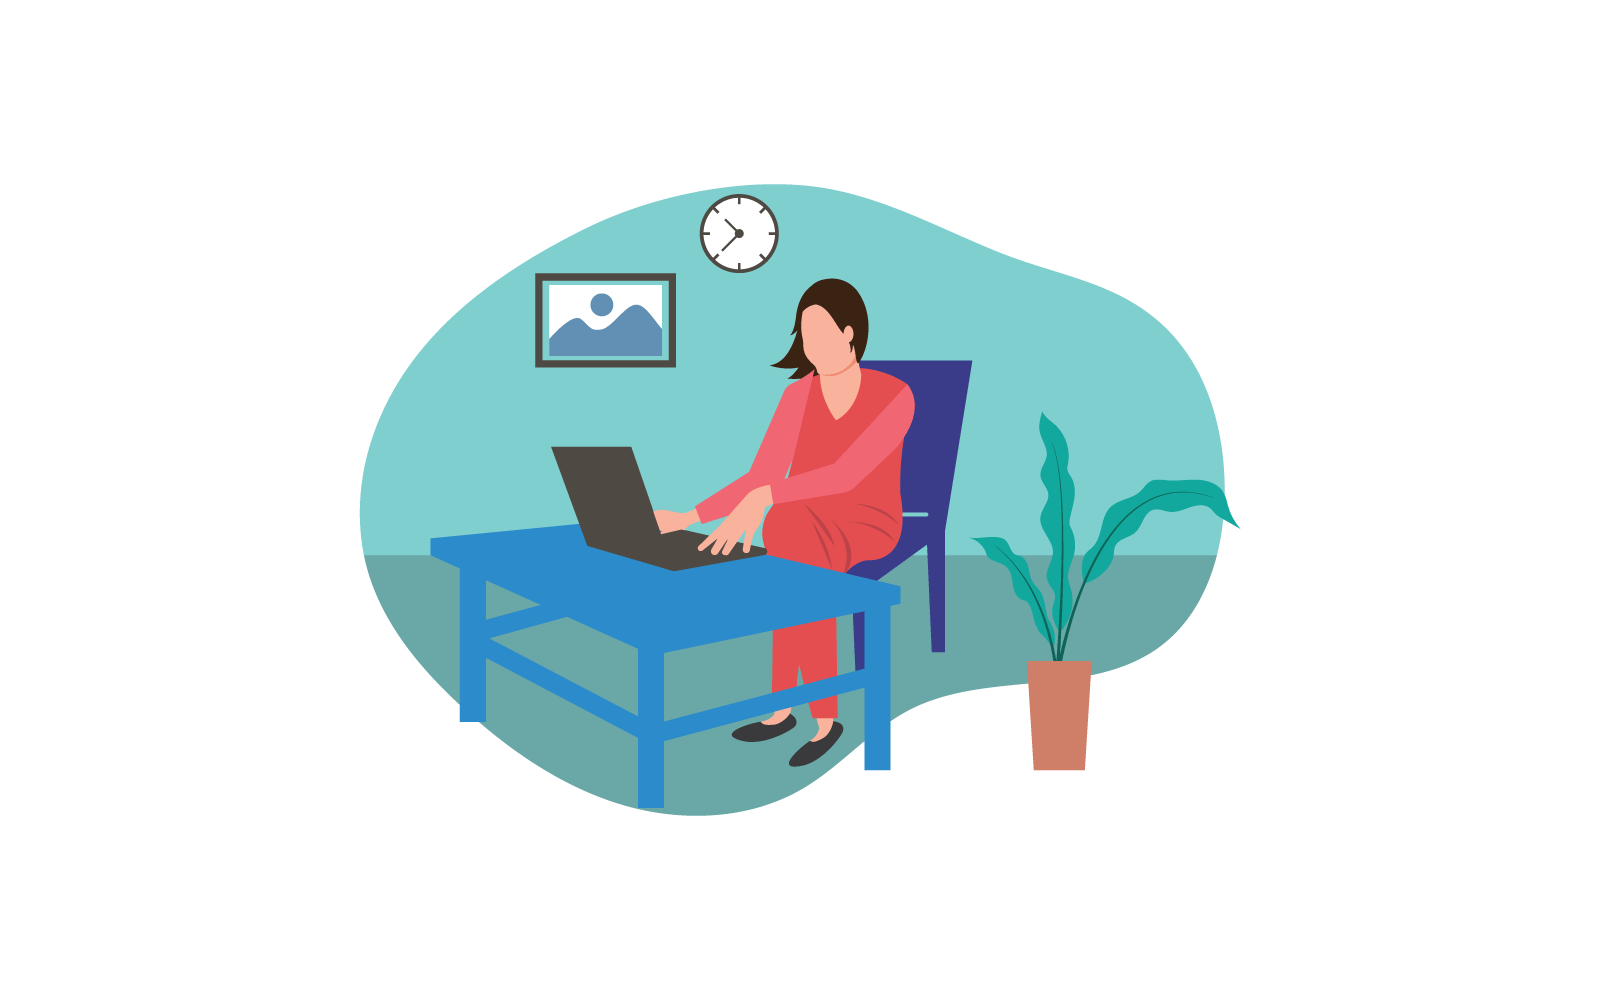 Women with laptop work from home flat design illustration